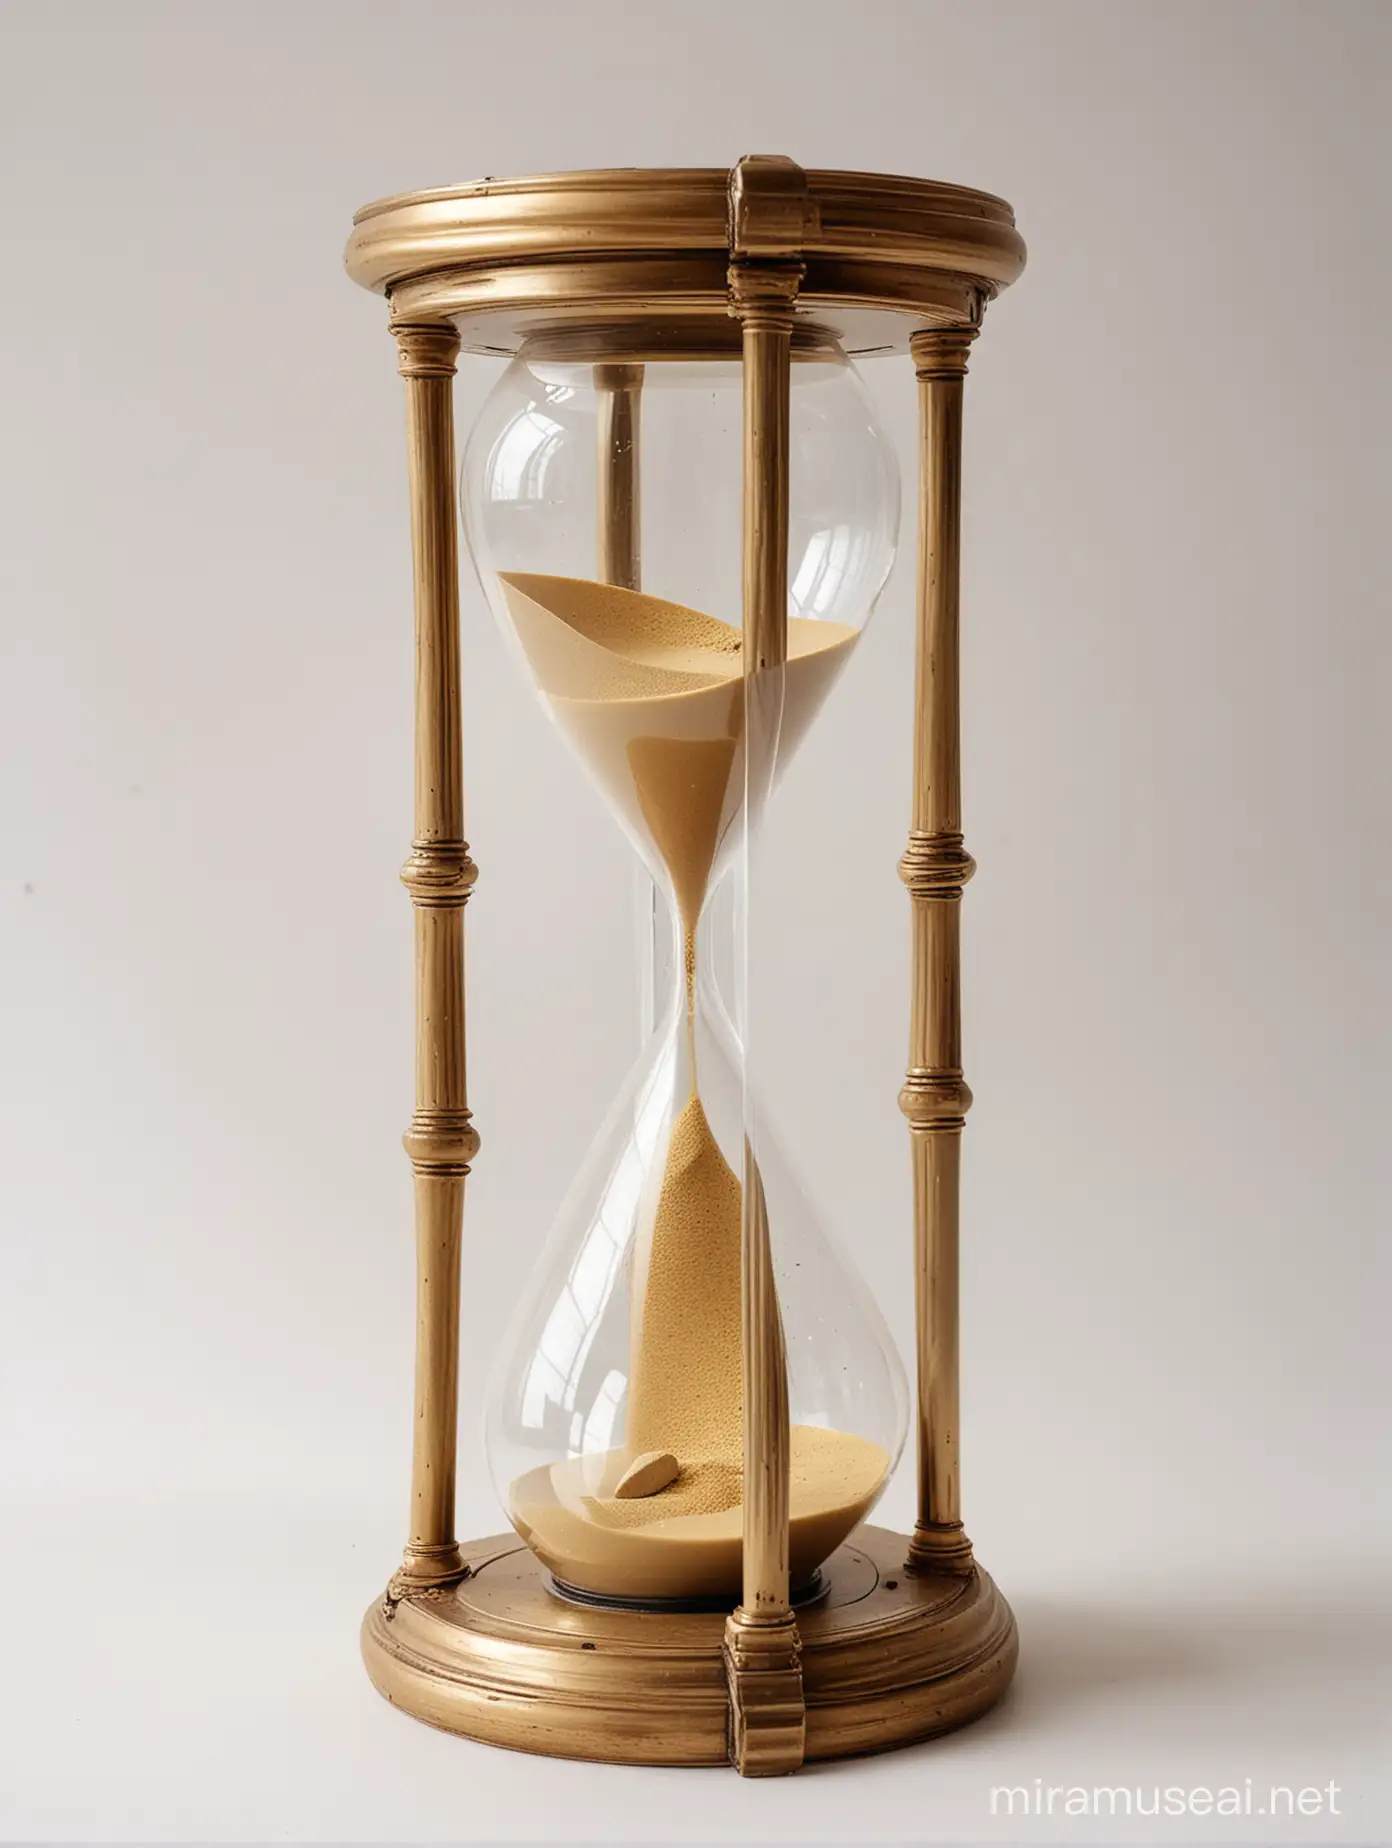 Antique hourglass made from 6banks. Banks are situated from up to down. Golden sand inside. Clear white backround.